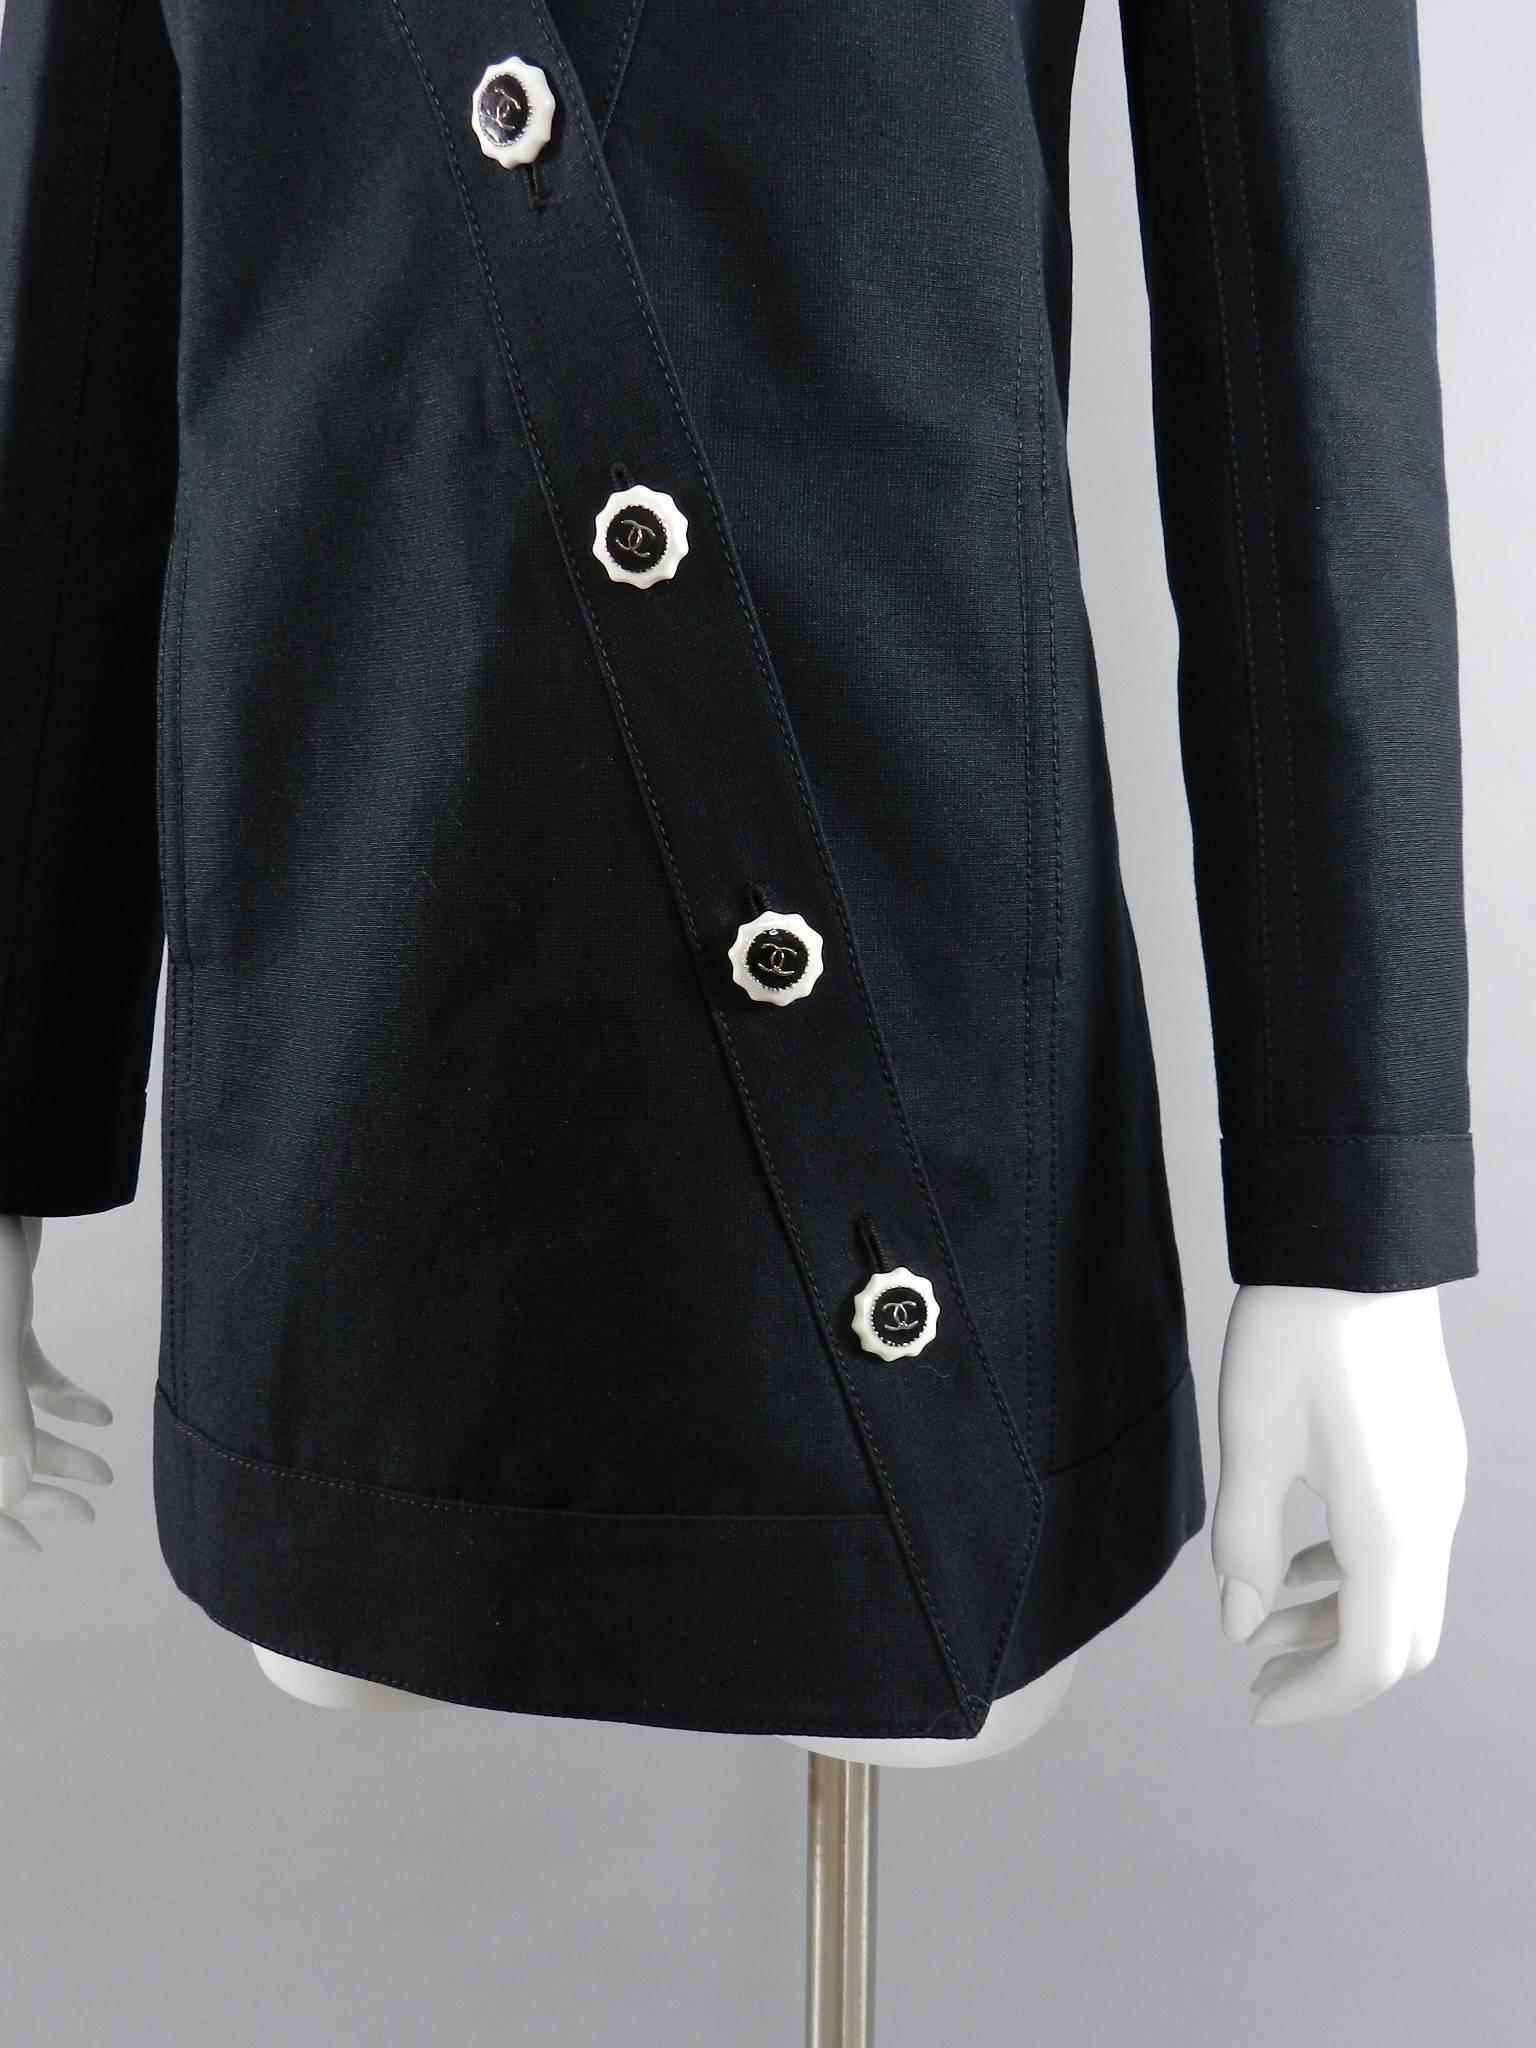 CHANEL 14C Runway Black Cotton Linen Jacket with White Buttons 2